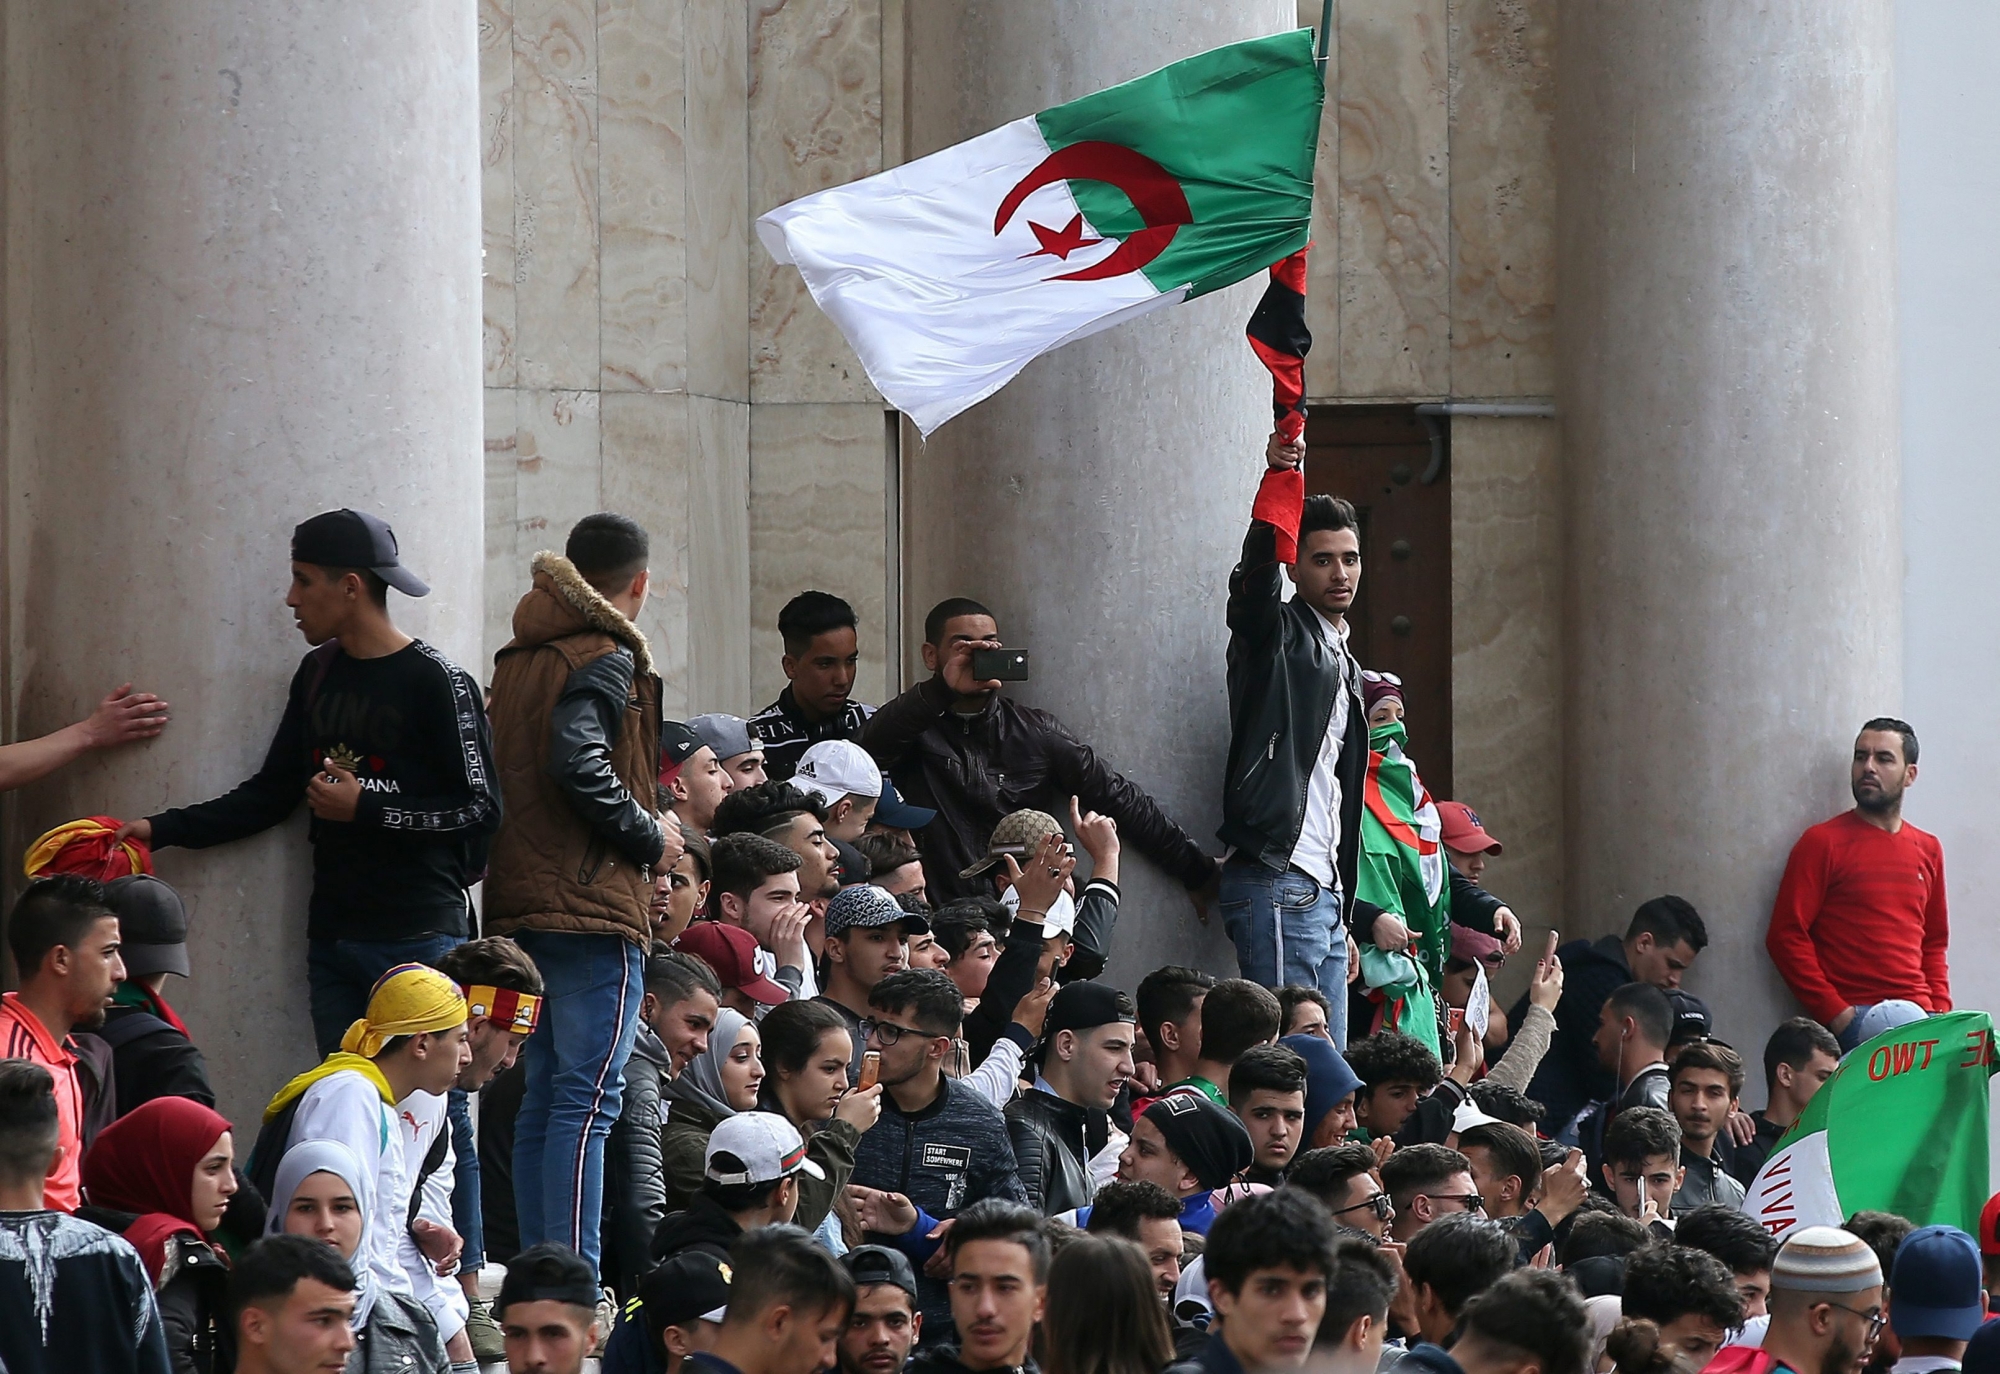 epa07426806 Algerian students protest against the fifth term of Algerian President Abdelaziz Bouteflika in Algiers, Algeria, 10 March 2019. The Algerian government decided on 09 March to start university vacations earlier in a bid to impede the massive protests that began 22 February against the candidacy of Bouteflika, the president since 1999, who submitted his re-election candidacy papers on 03 March despite the mystery surrounding his health status.  EPA/MOHAMED MESSARA ALGERIA PRESIDENTIAL ELECTIONS PROTEST